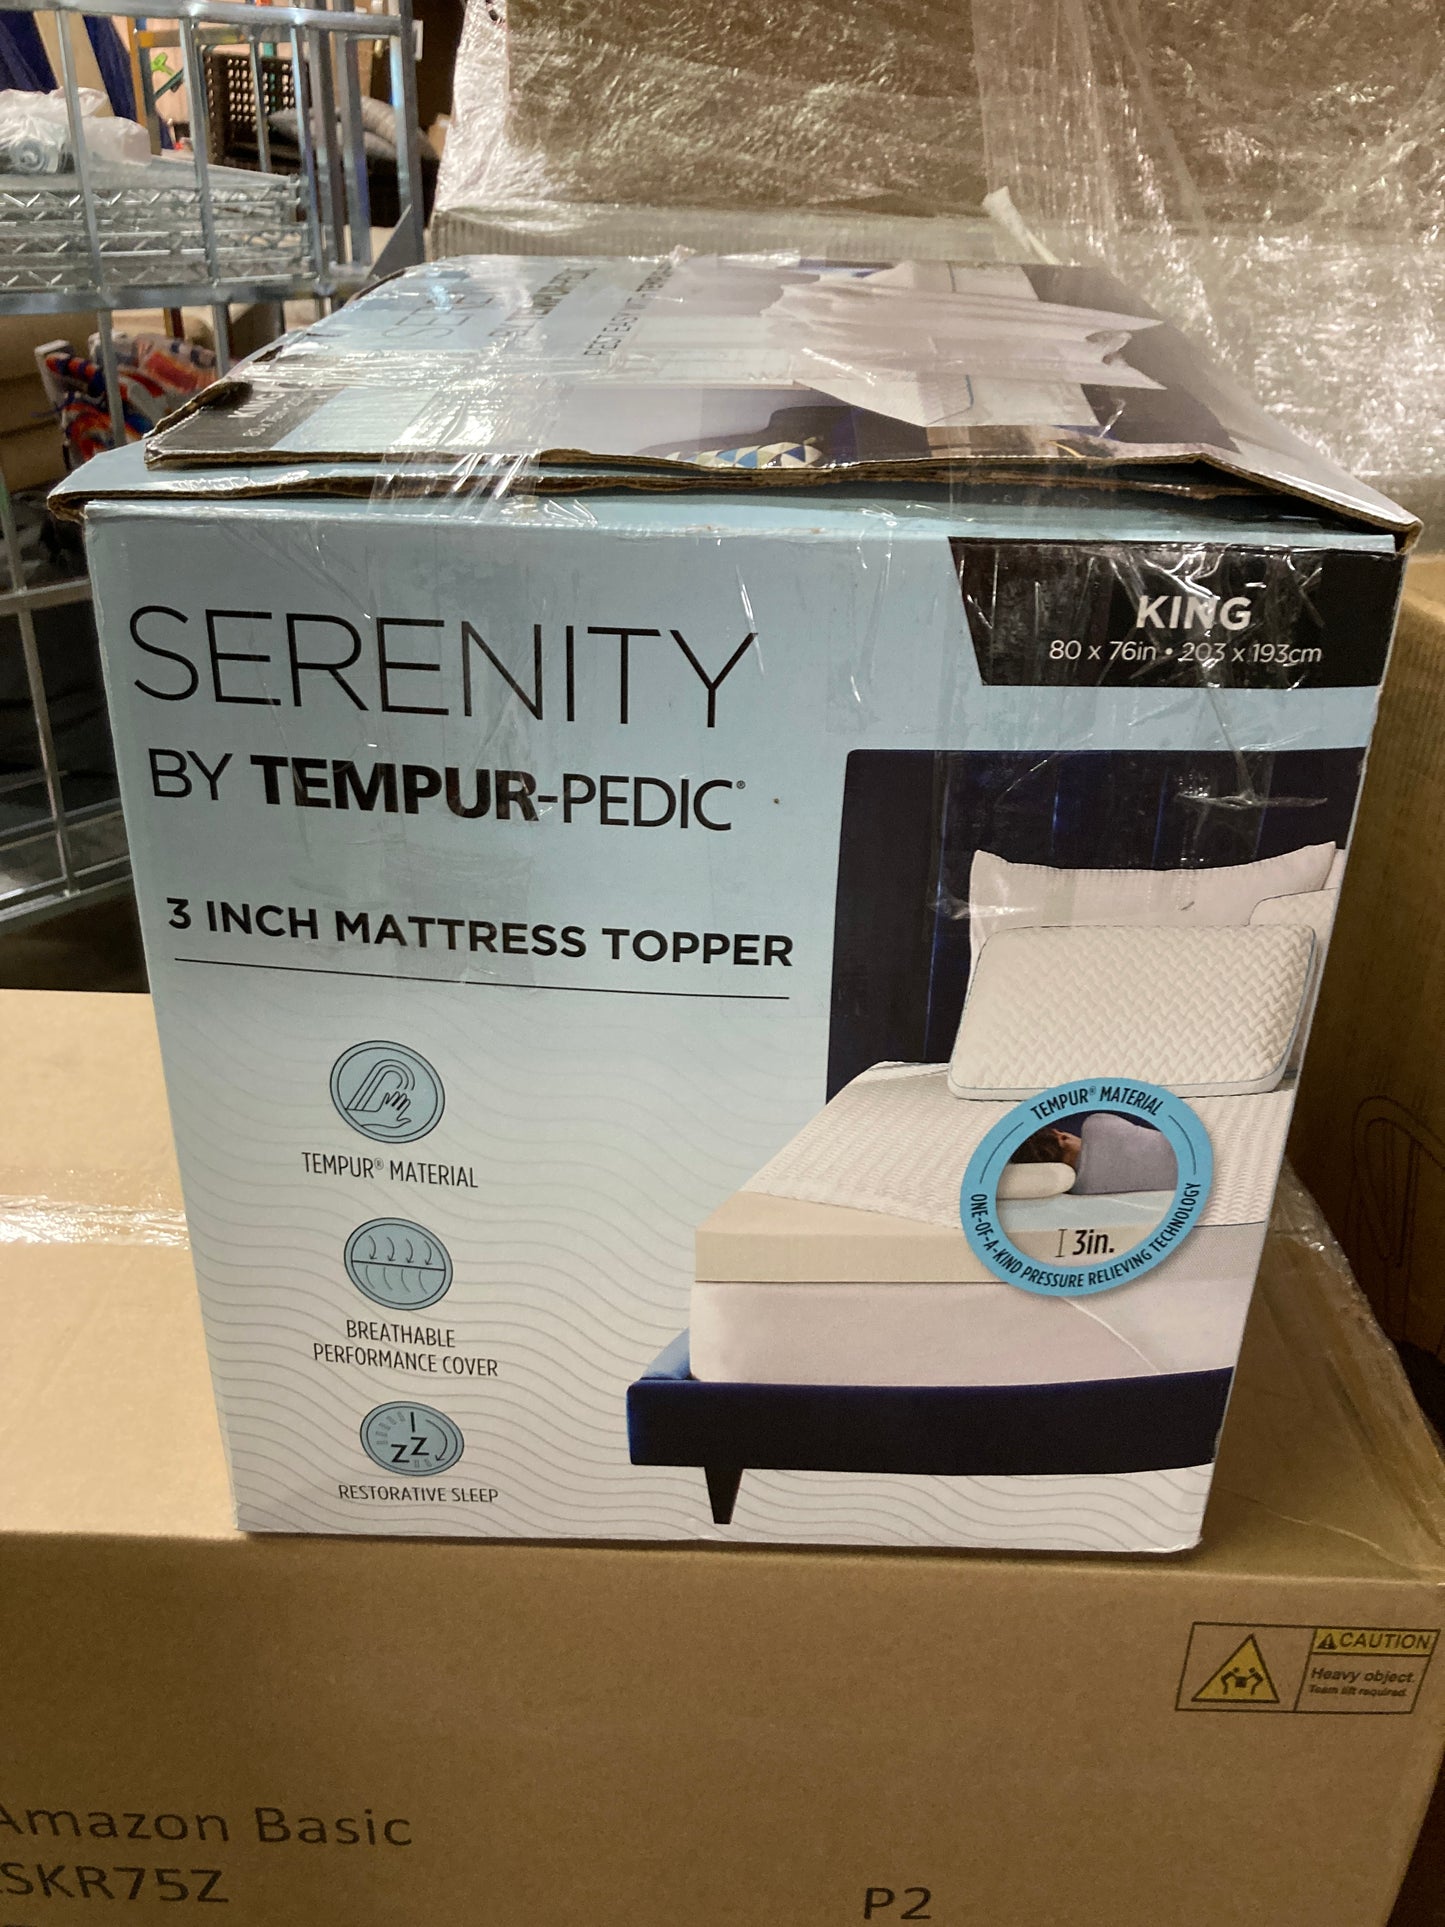 Costco - Serenity by Tempur-Pedic KING 3 Inch Mattress Topper - Retail $209 Default Title